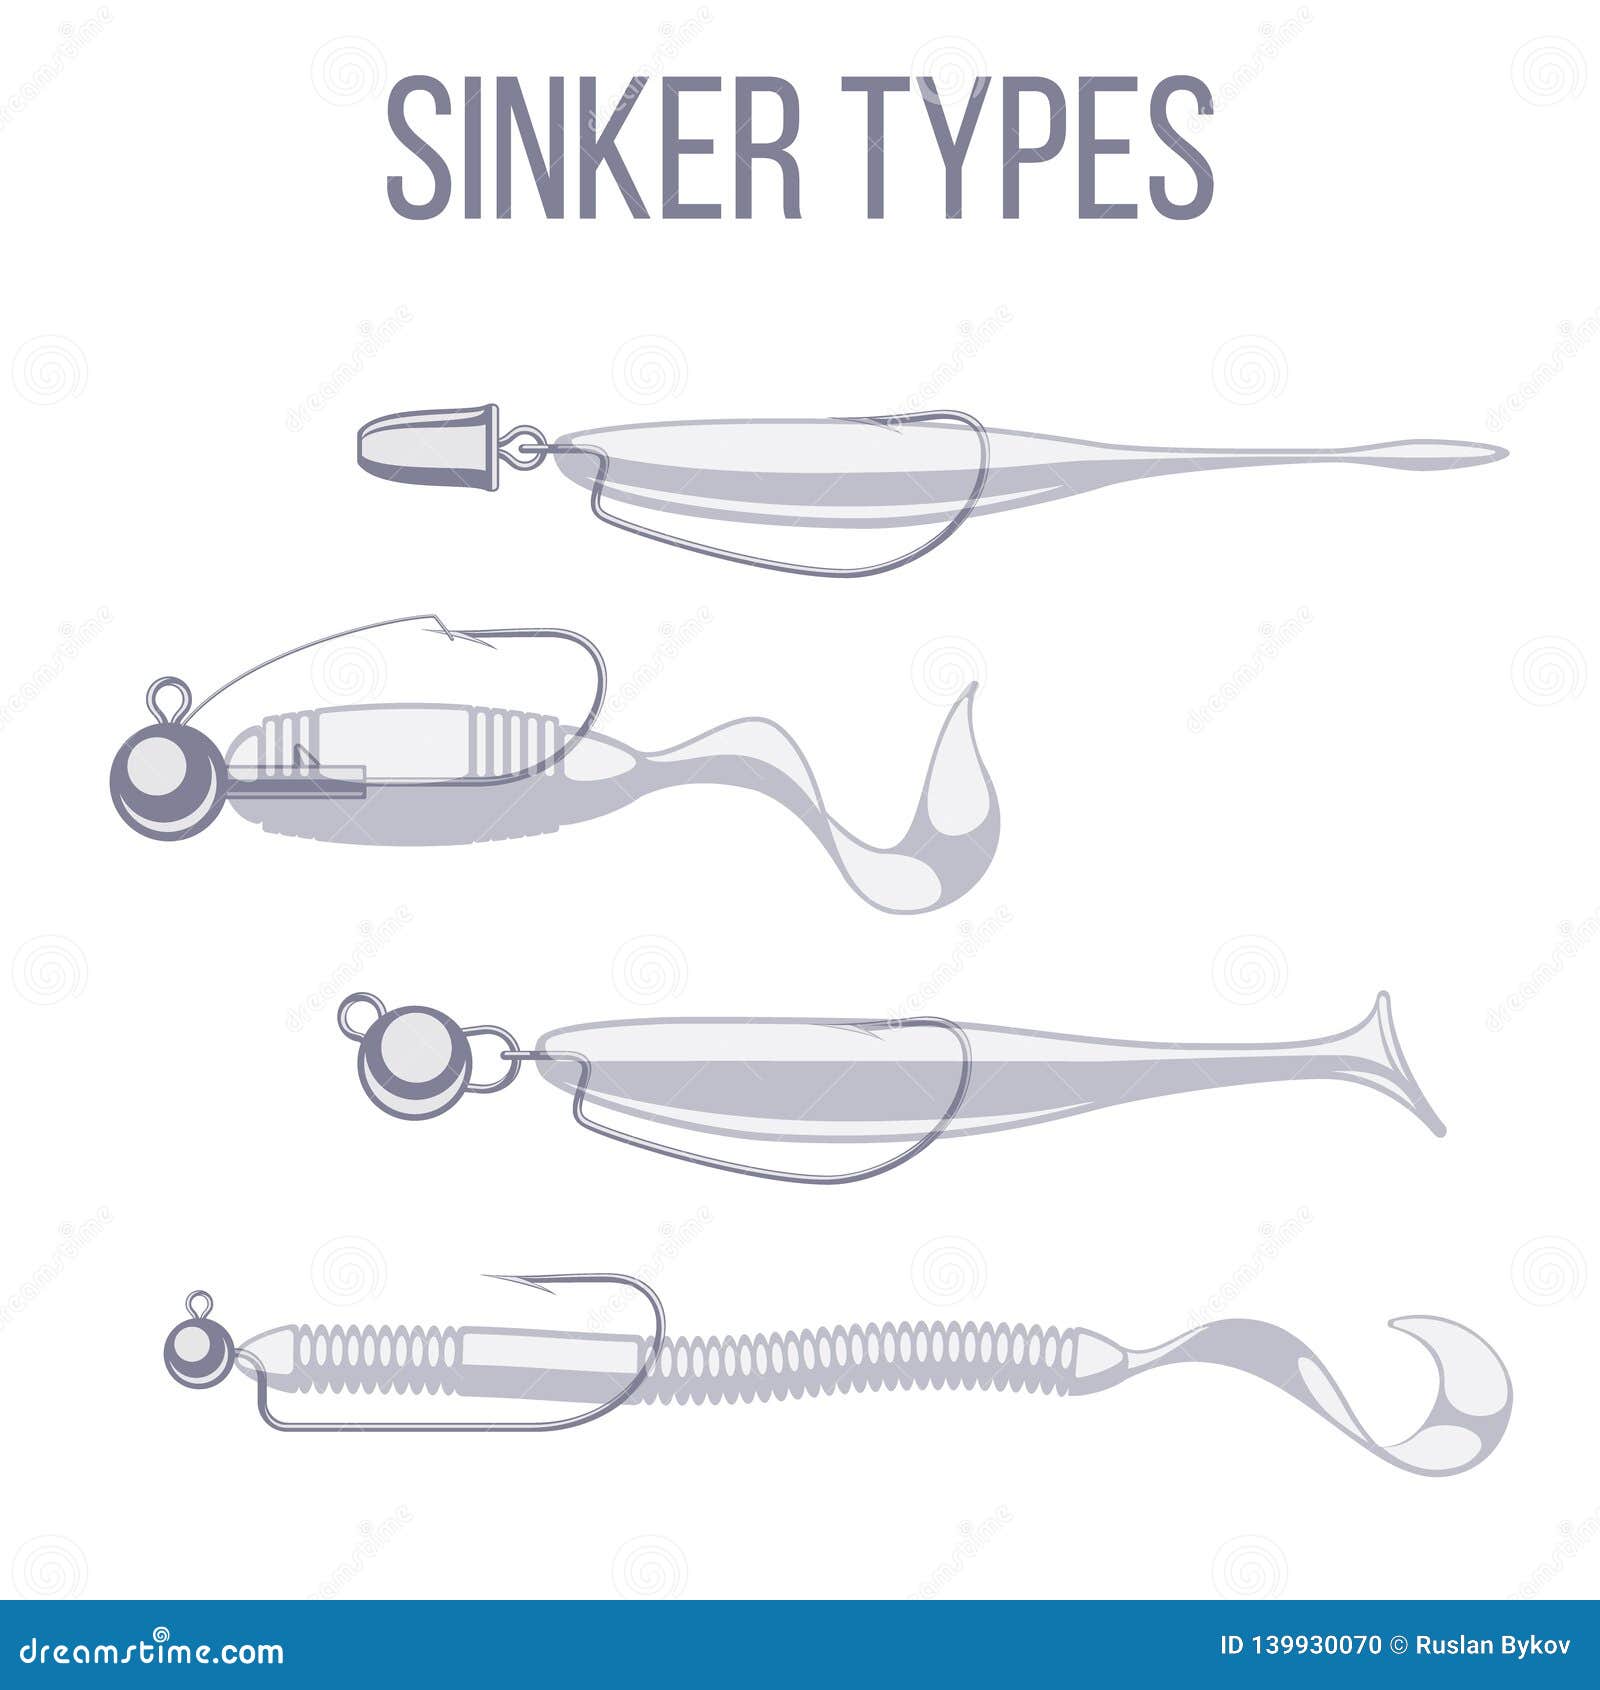 sinker types with offset hooks and jigs with soft plastic bait lures.